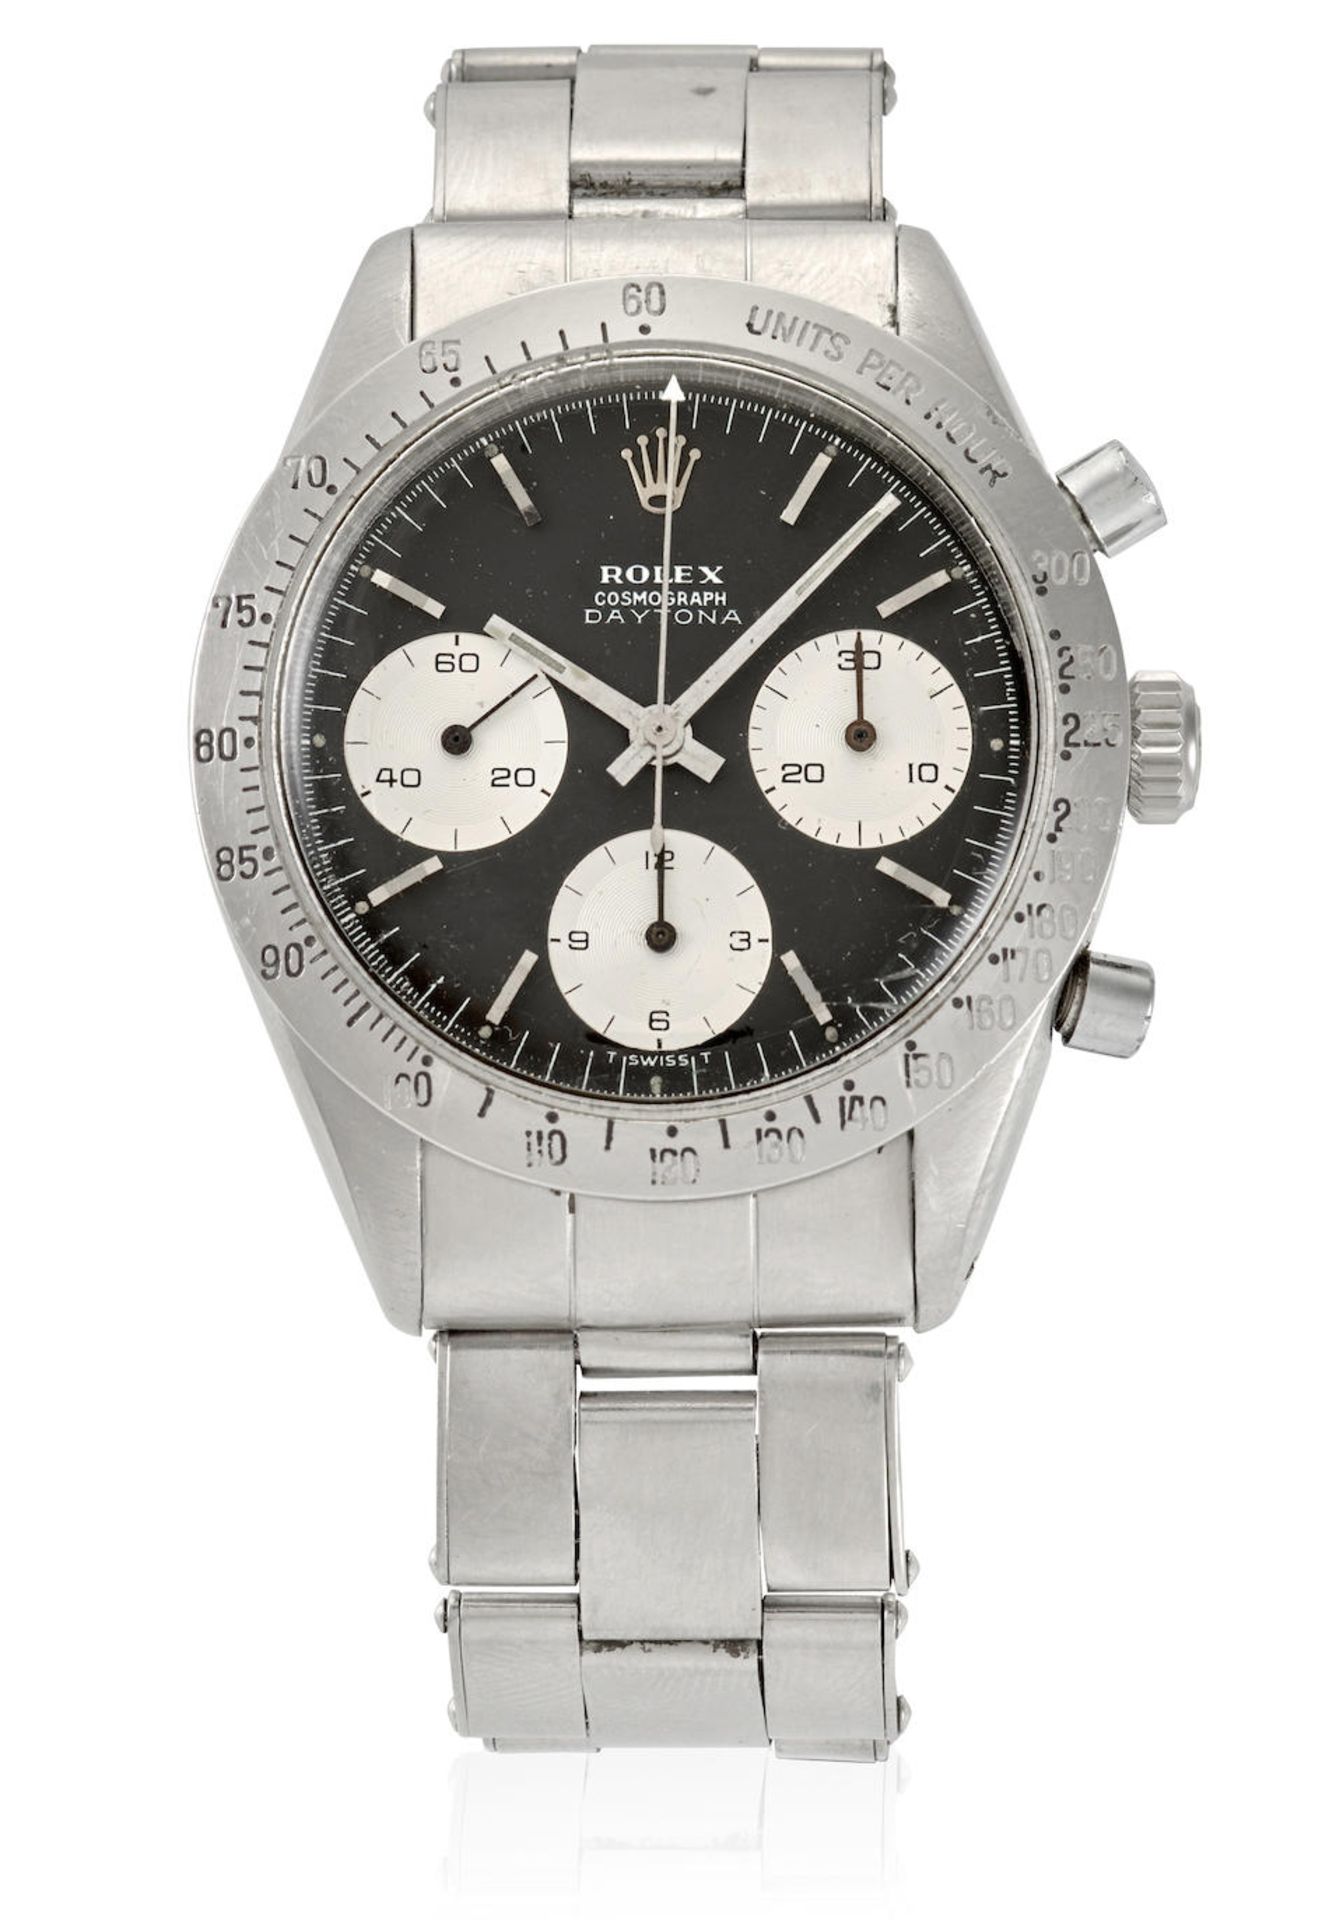 ROLEX. A STAINLESS STEEL MANUAL WIND CHRONOGRAPH BRACELET WATCH Cosmograph , Ref: 6239, c. 1967